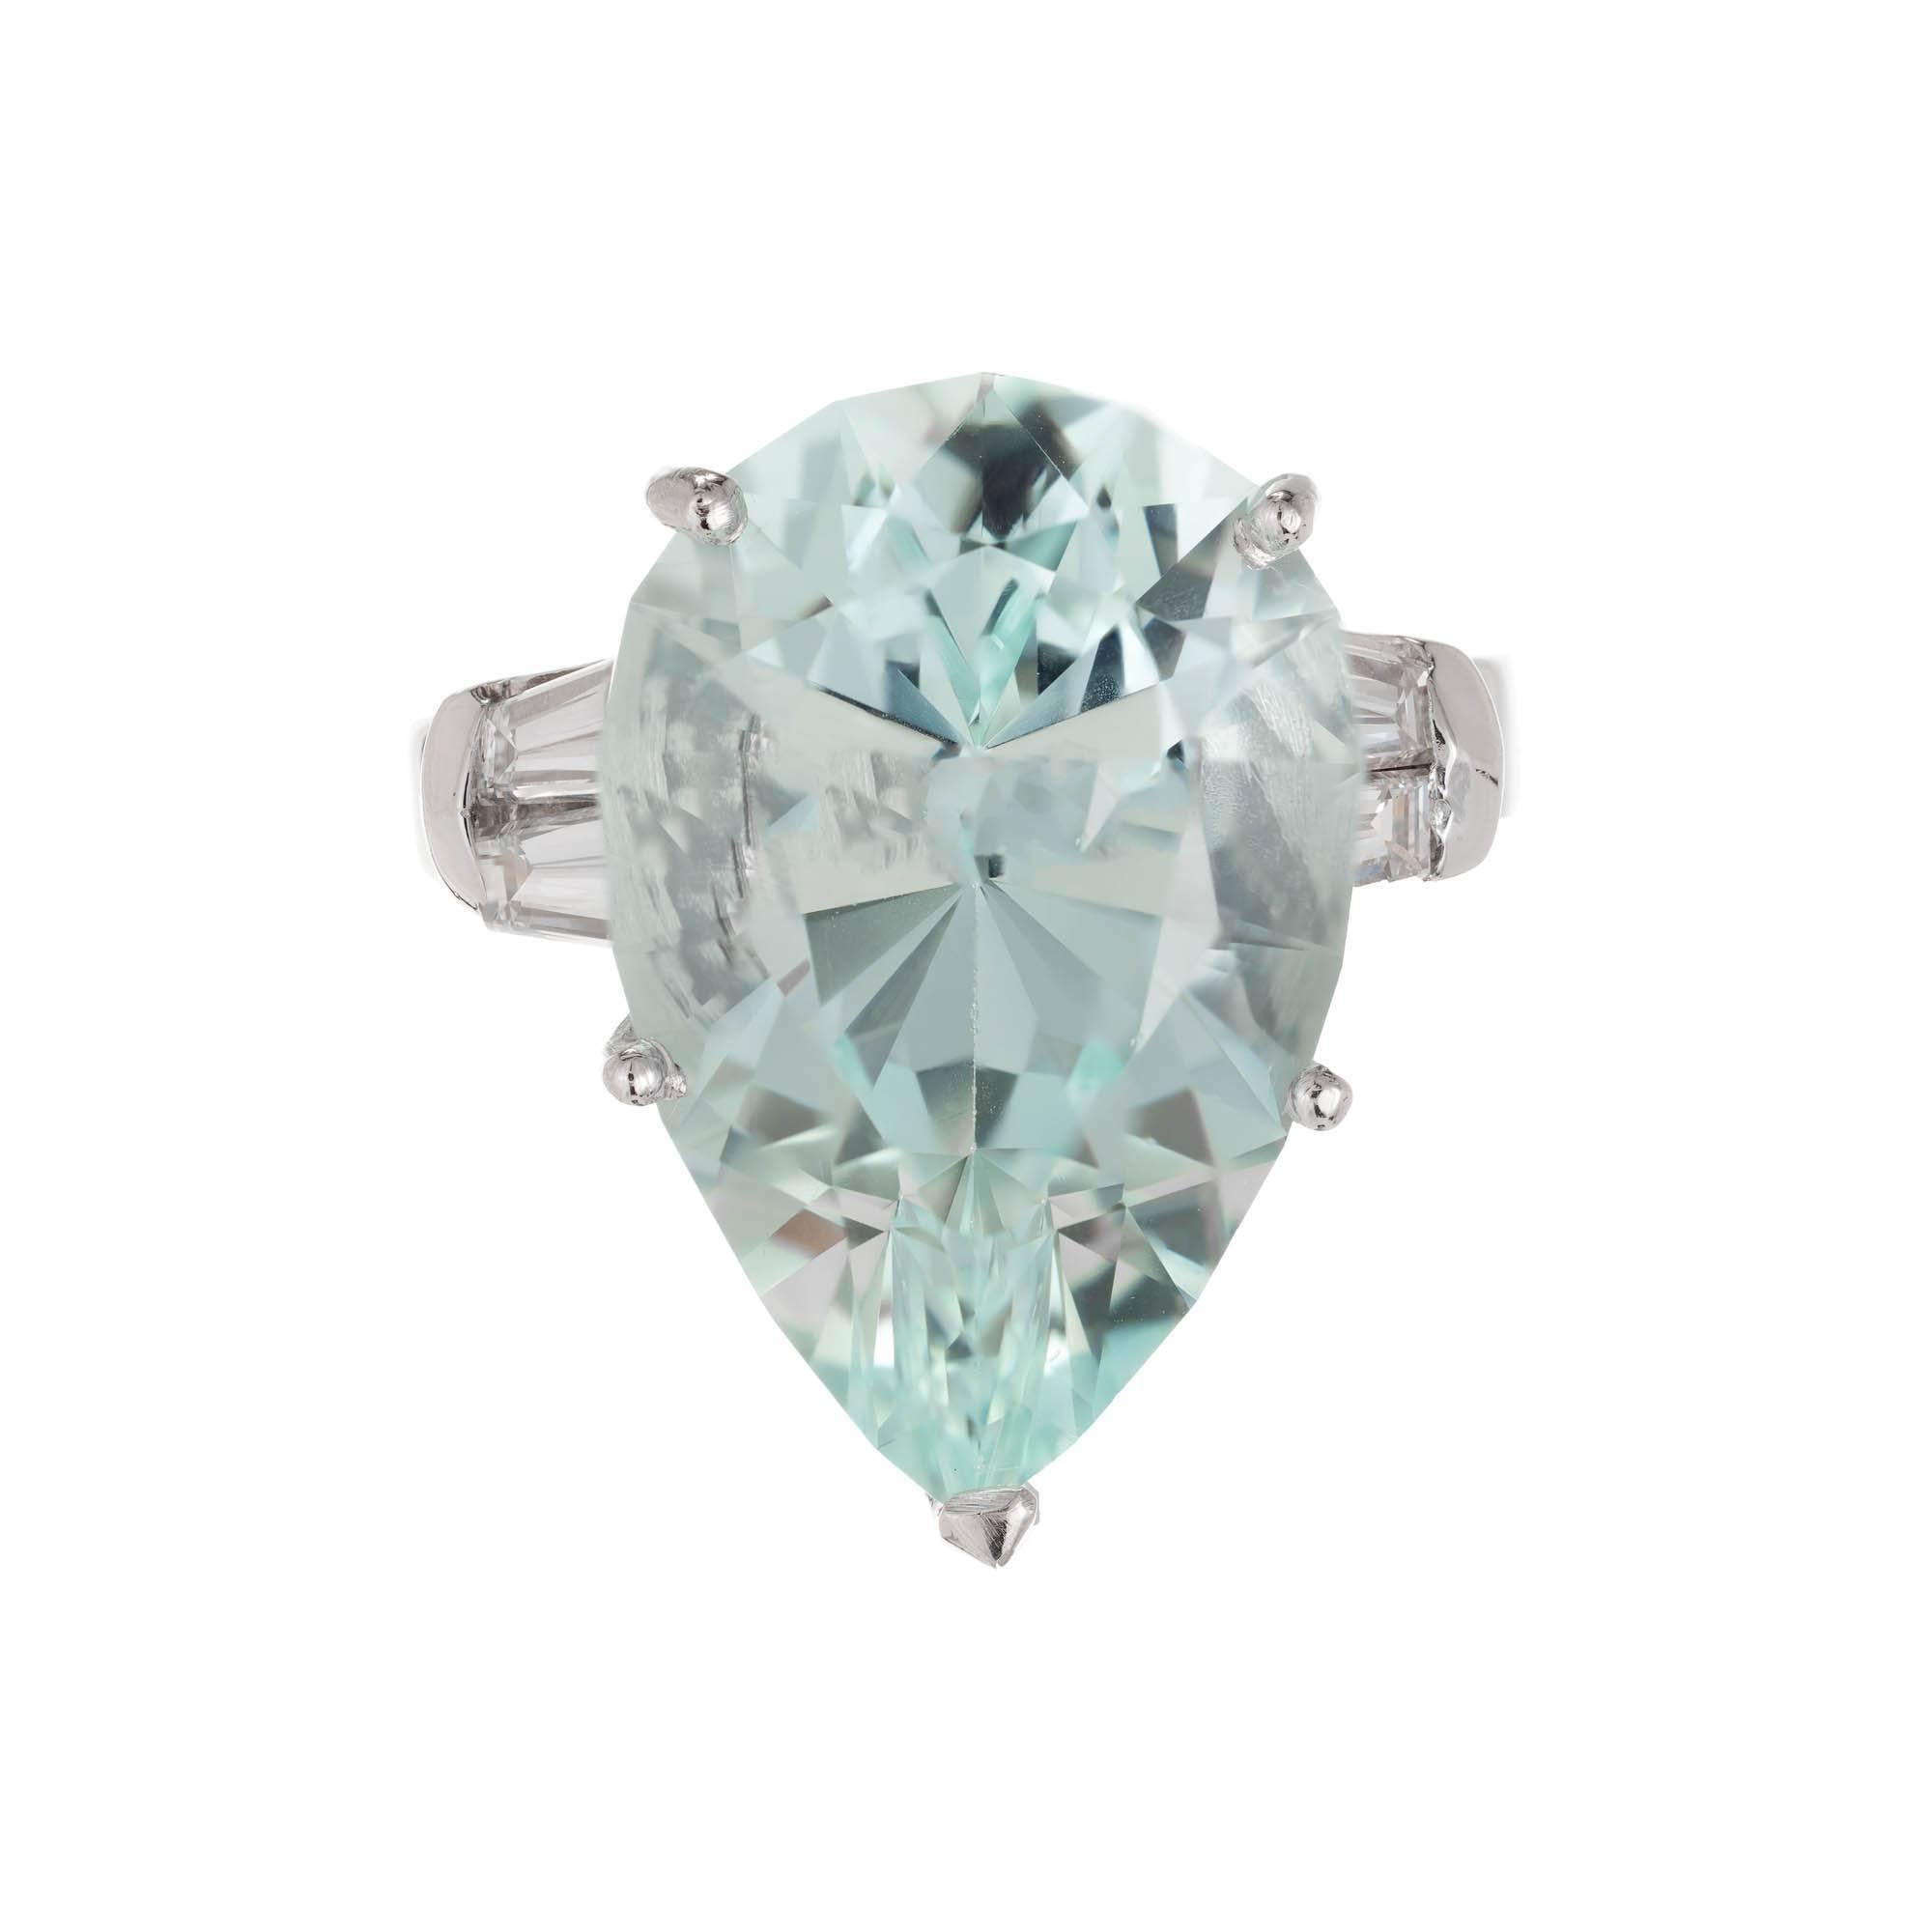 12.99ct Pear shaped Green bluer Aqua and diamond cocktail ring. Four baguette side diamonds. Solid Platinum. Circa 1940 to 1950. 

1 pear shaped light greenish blue Aqua, approx. total weight 12.99cts, VS, 20.35 x 13.60 x 10.05mm, GIA certificate